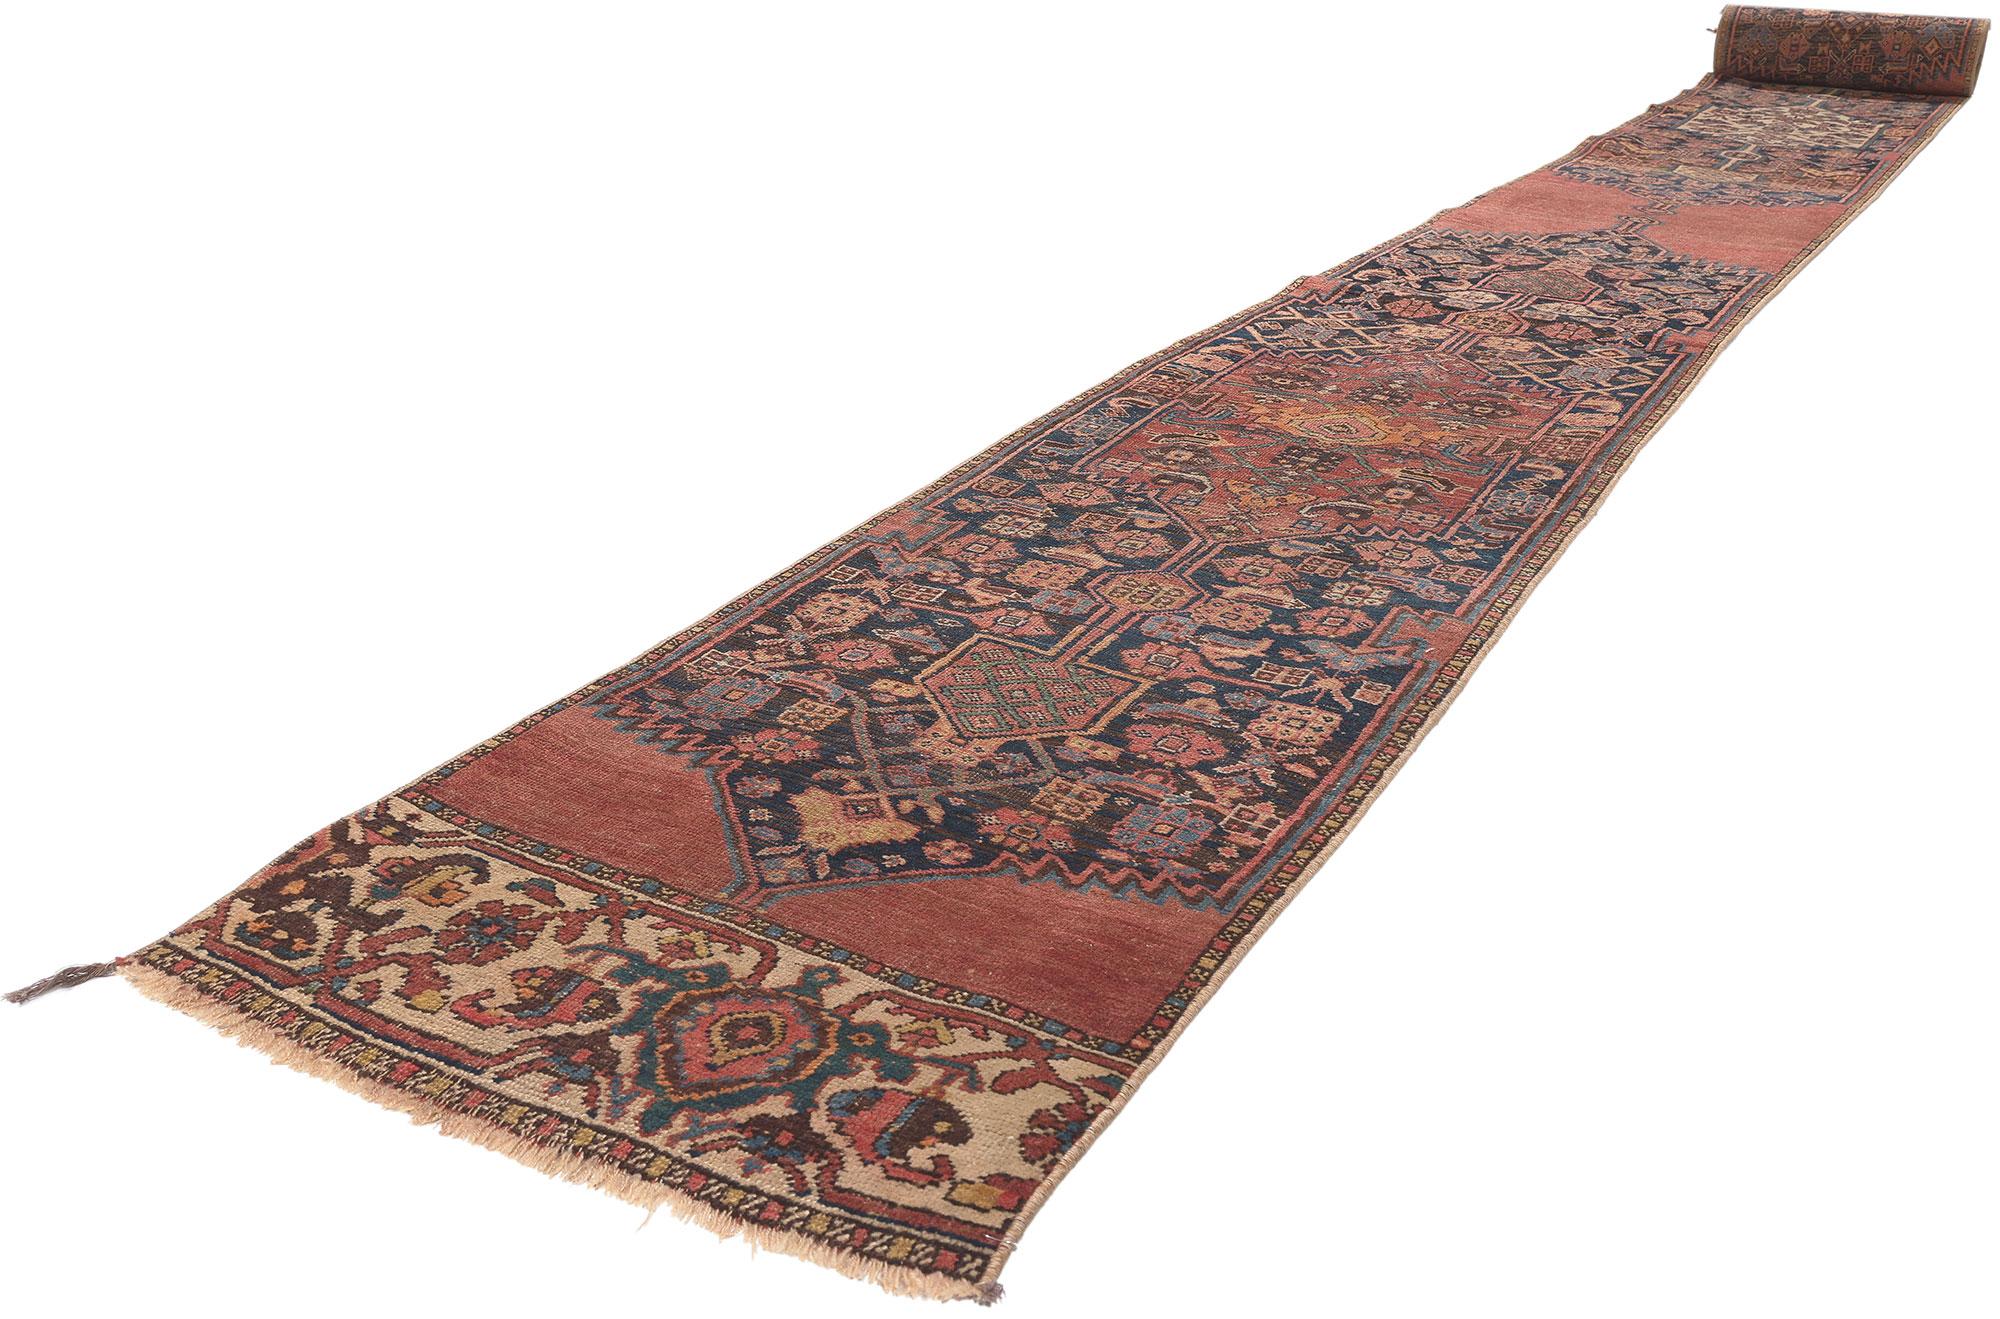 53868 Antique Persian Bijar Runner, 01'11 x 25'11. Emulating traditional style with rustic sensibility with incredible detail and texture, this antique Persian Bijar rug runner is a captivating vision of woven beauty. The intricate design and earthy